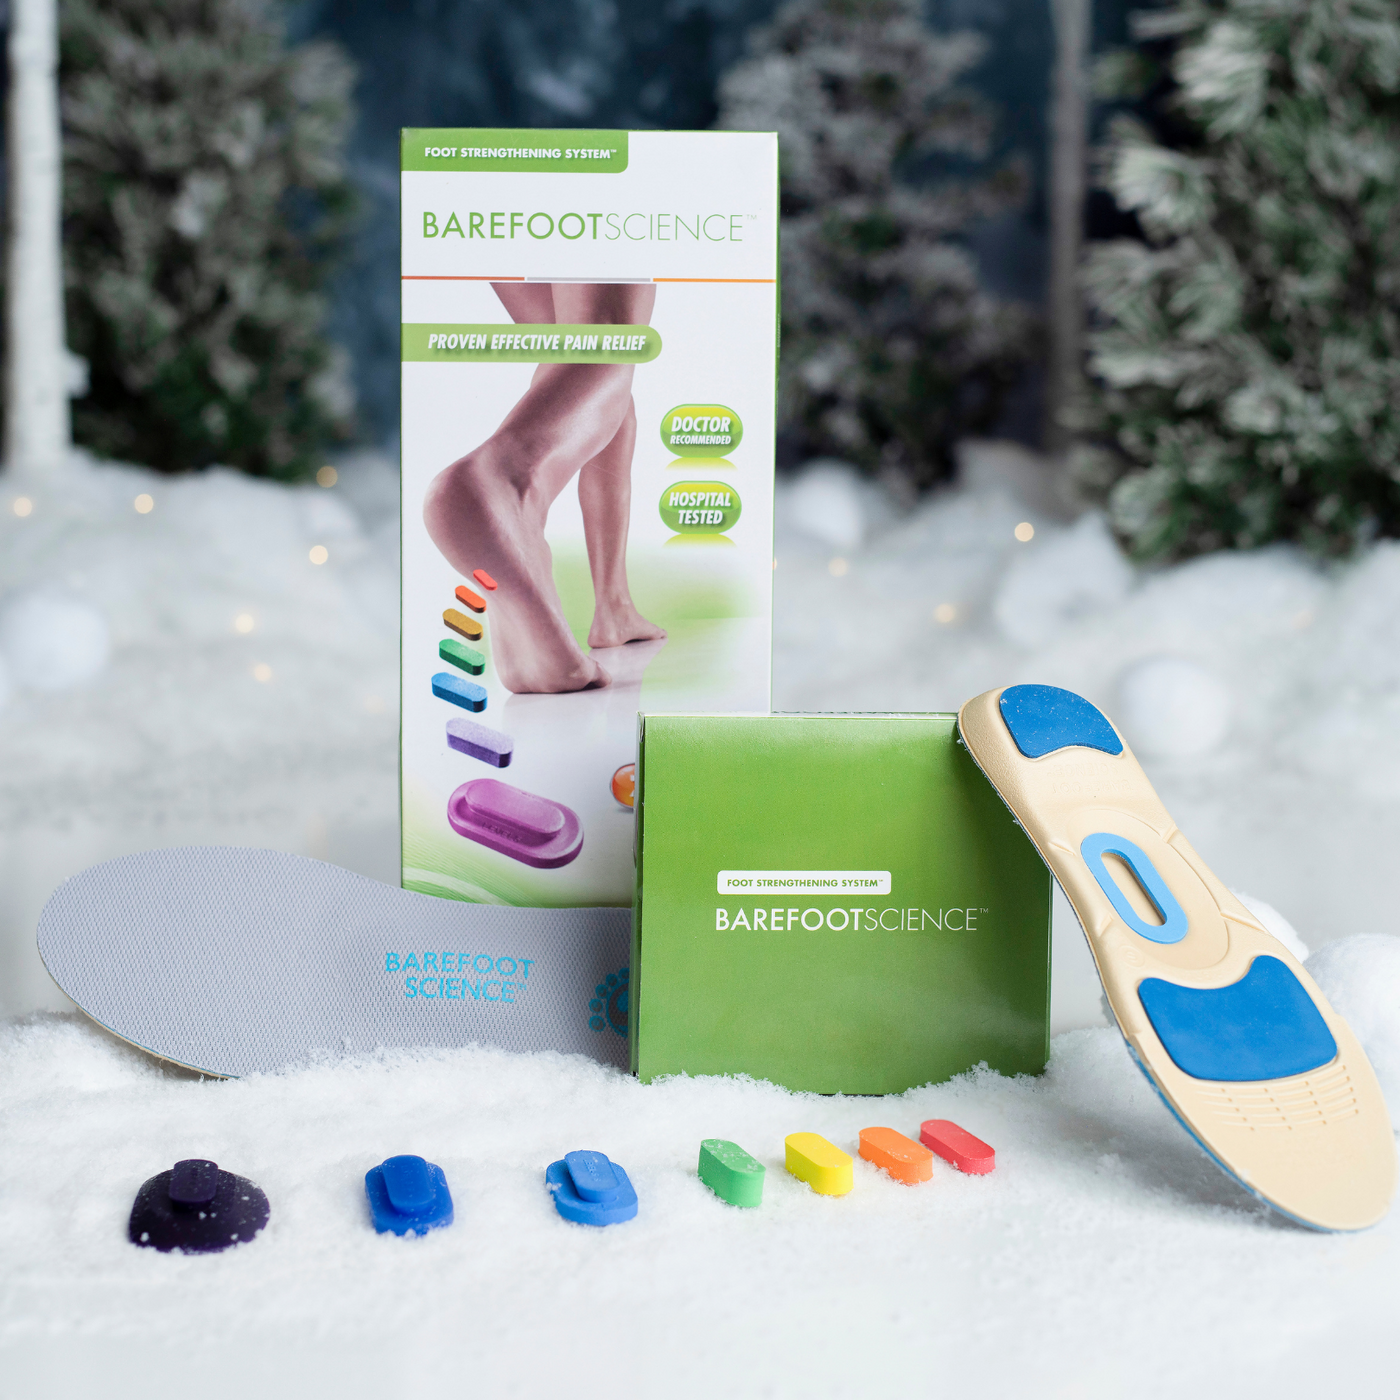 Barefoot Science Therapeutic PLUS Full Length top and bottom of insole with inserts and product packaging